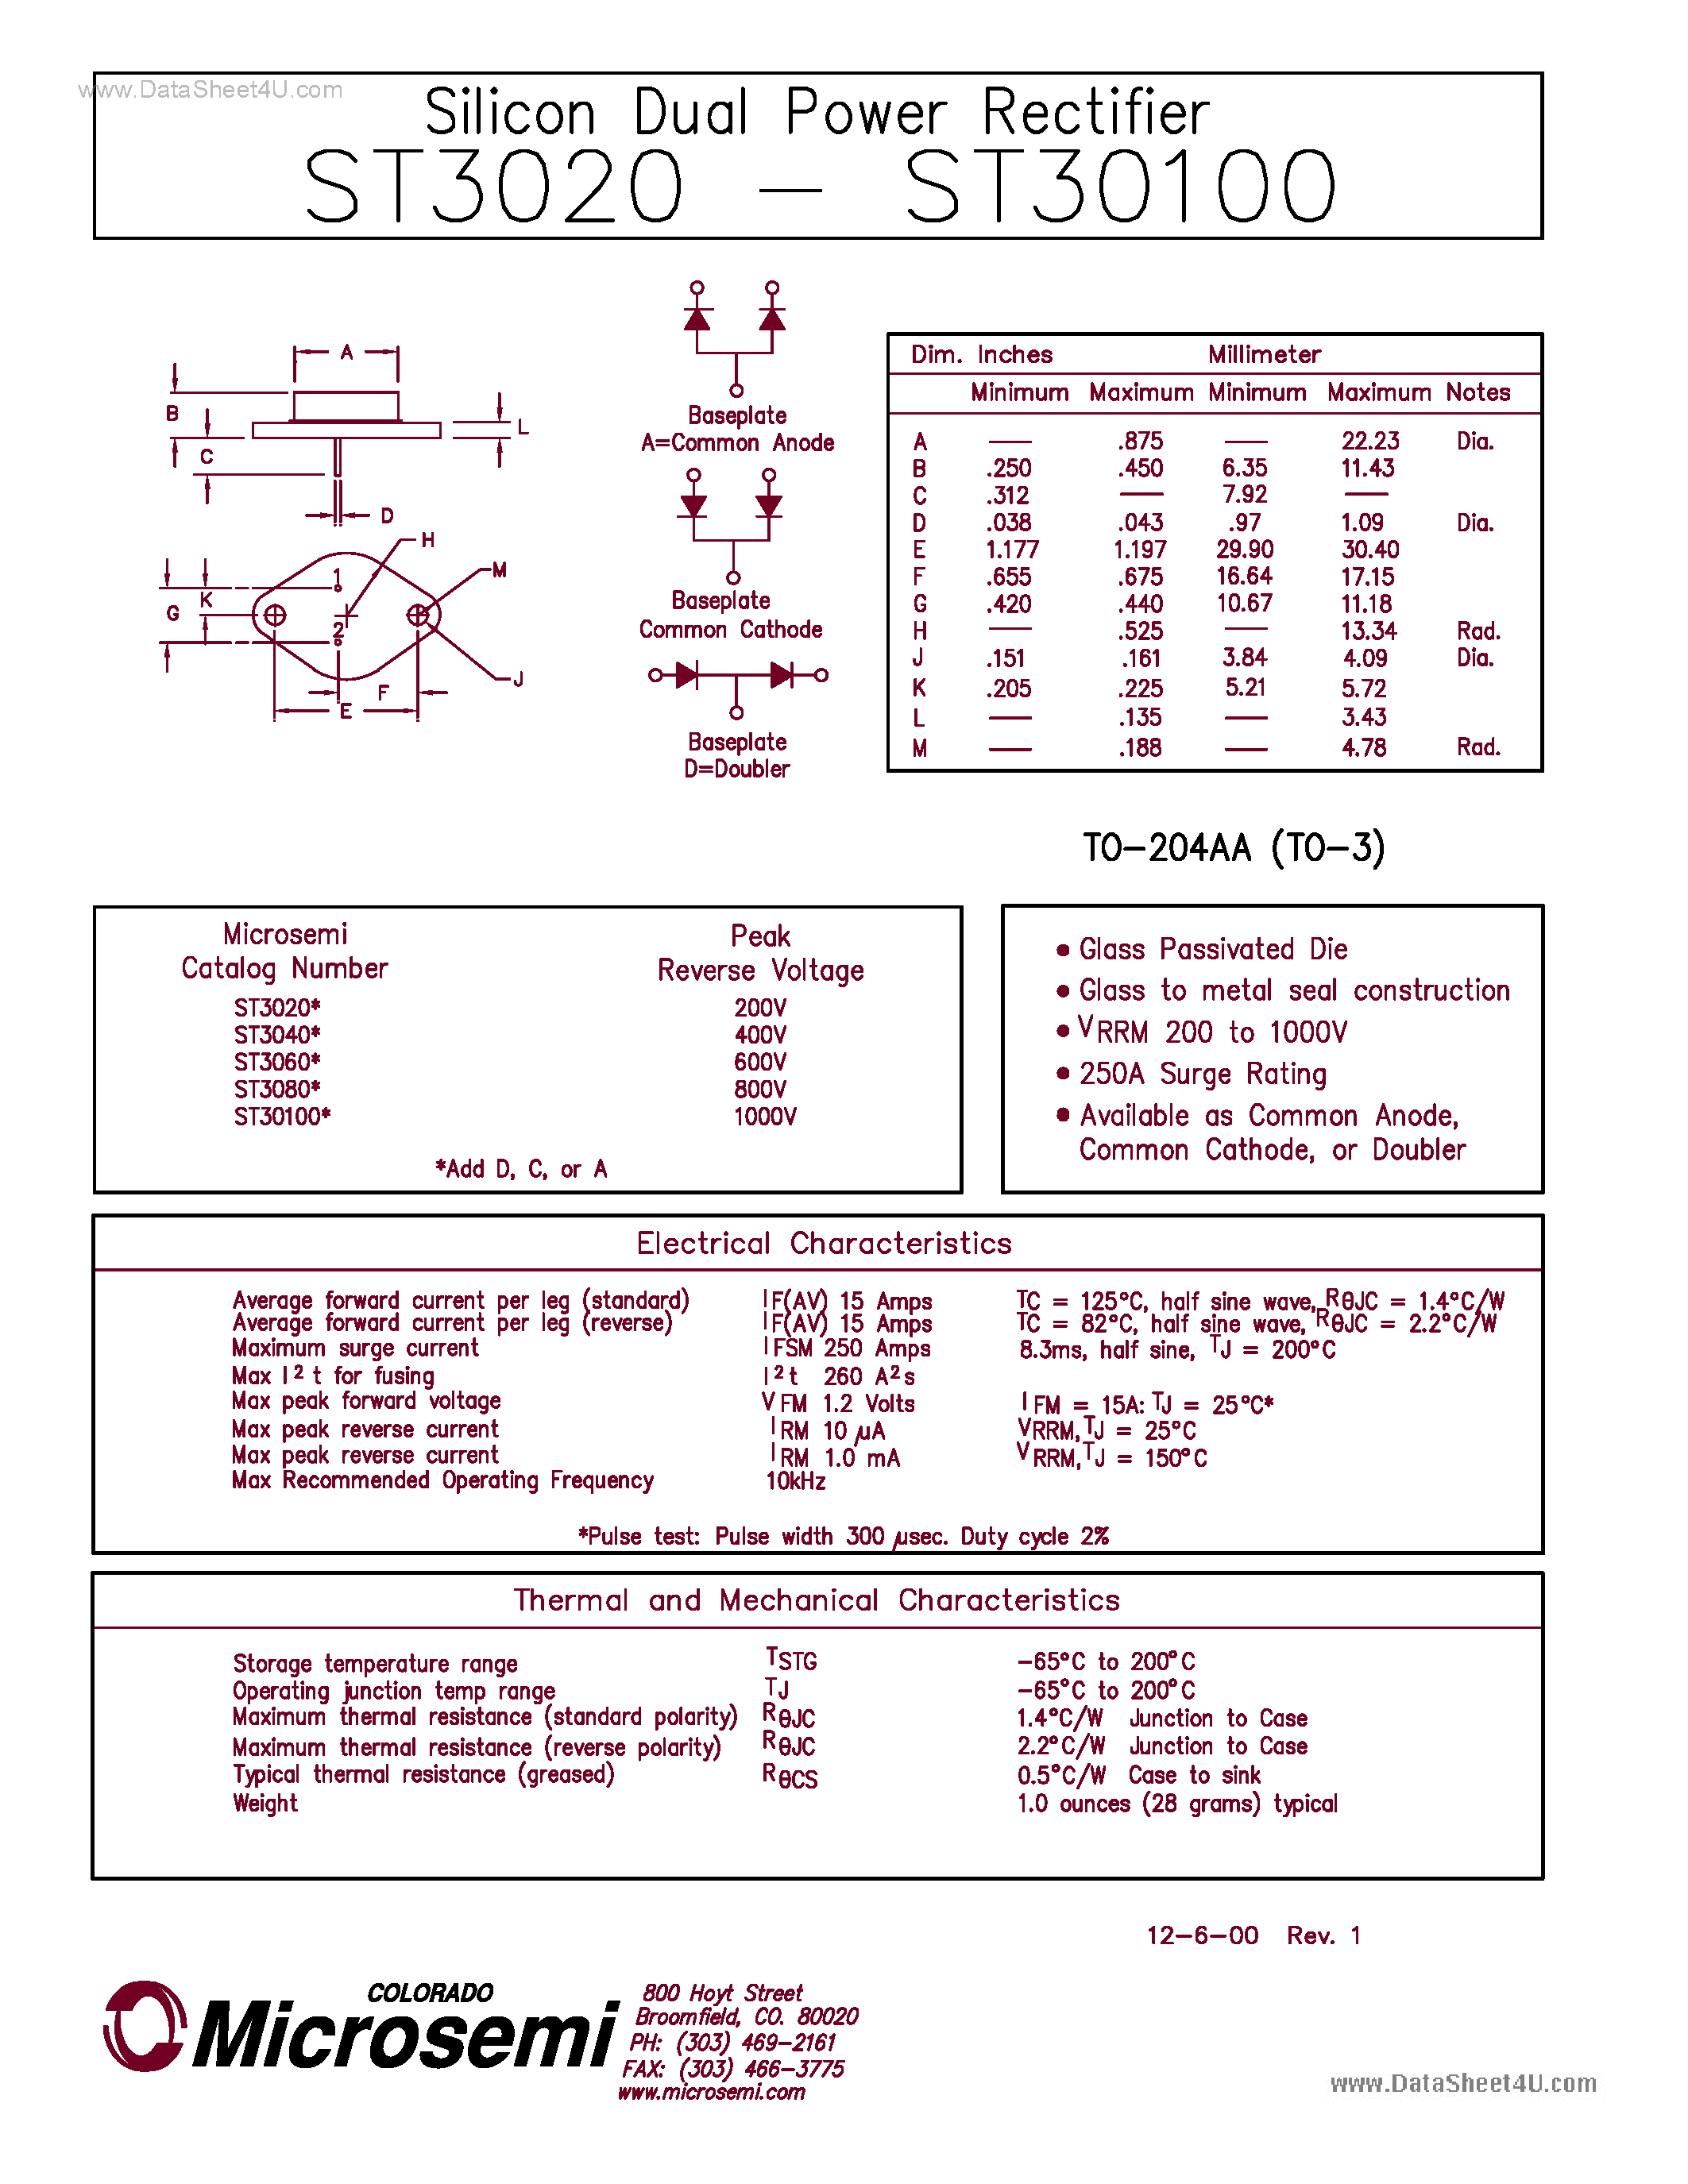 Datasheet ST30100 - (ST3020 - ST30100) Silicon Dual Power Rectifier page 1